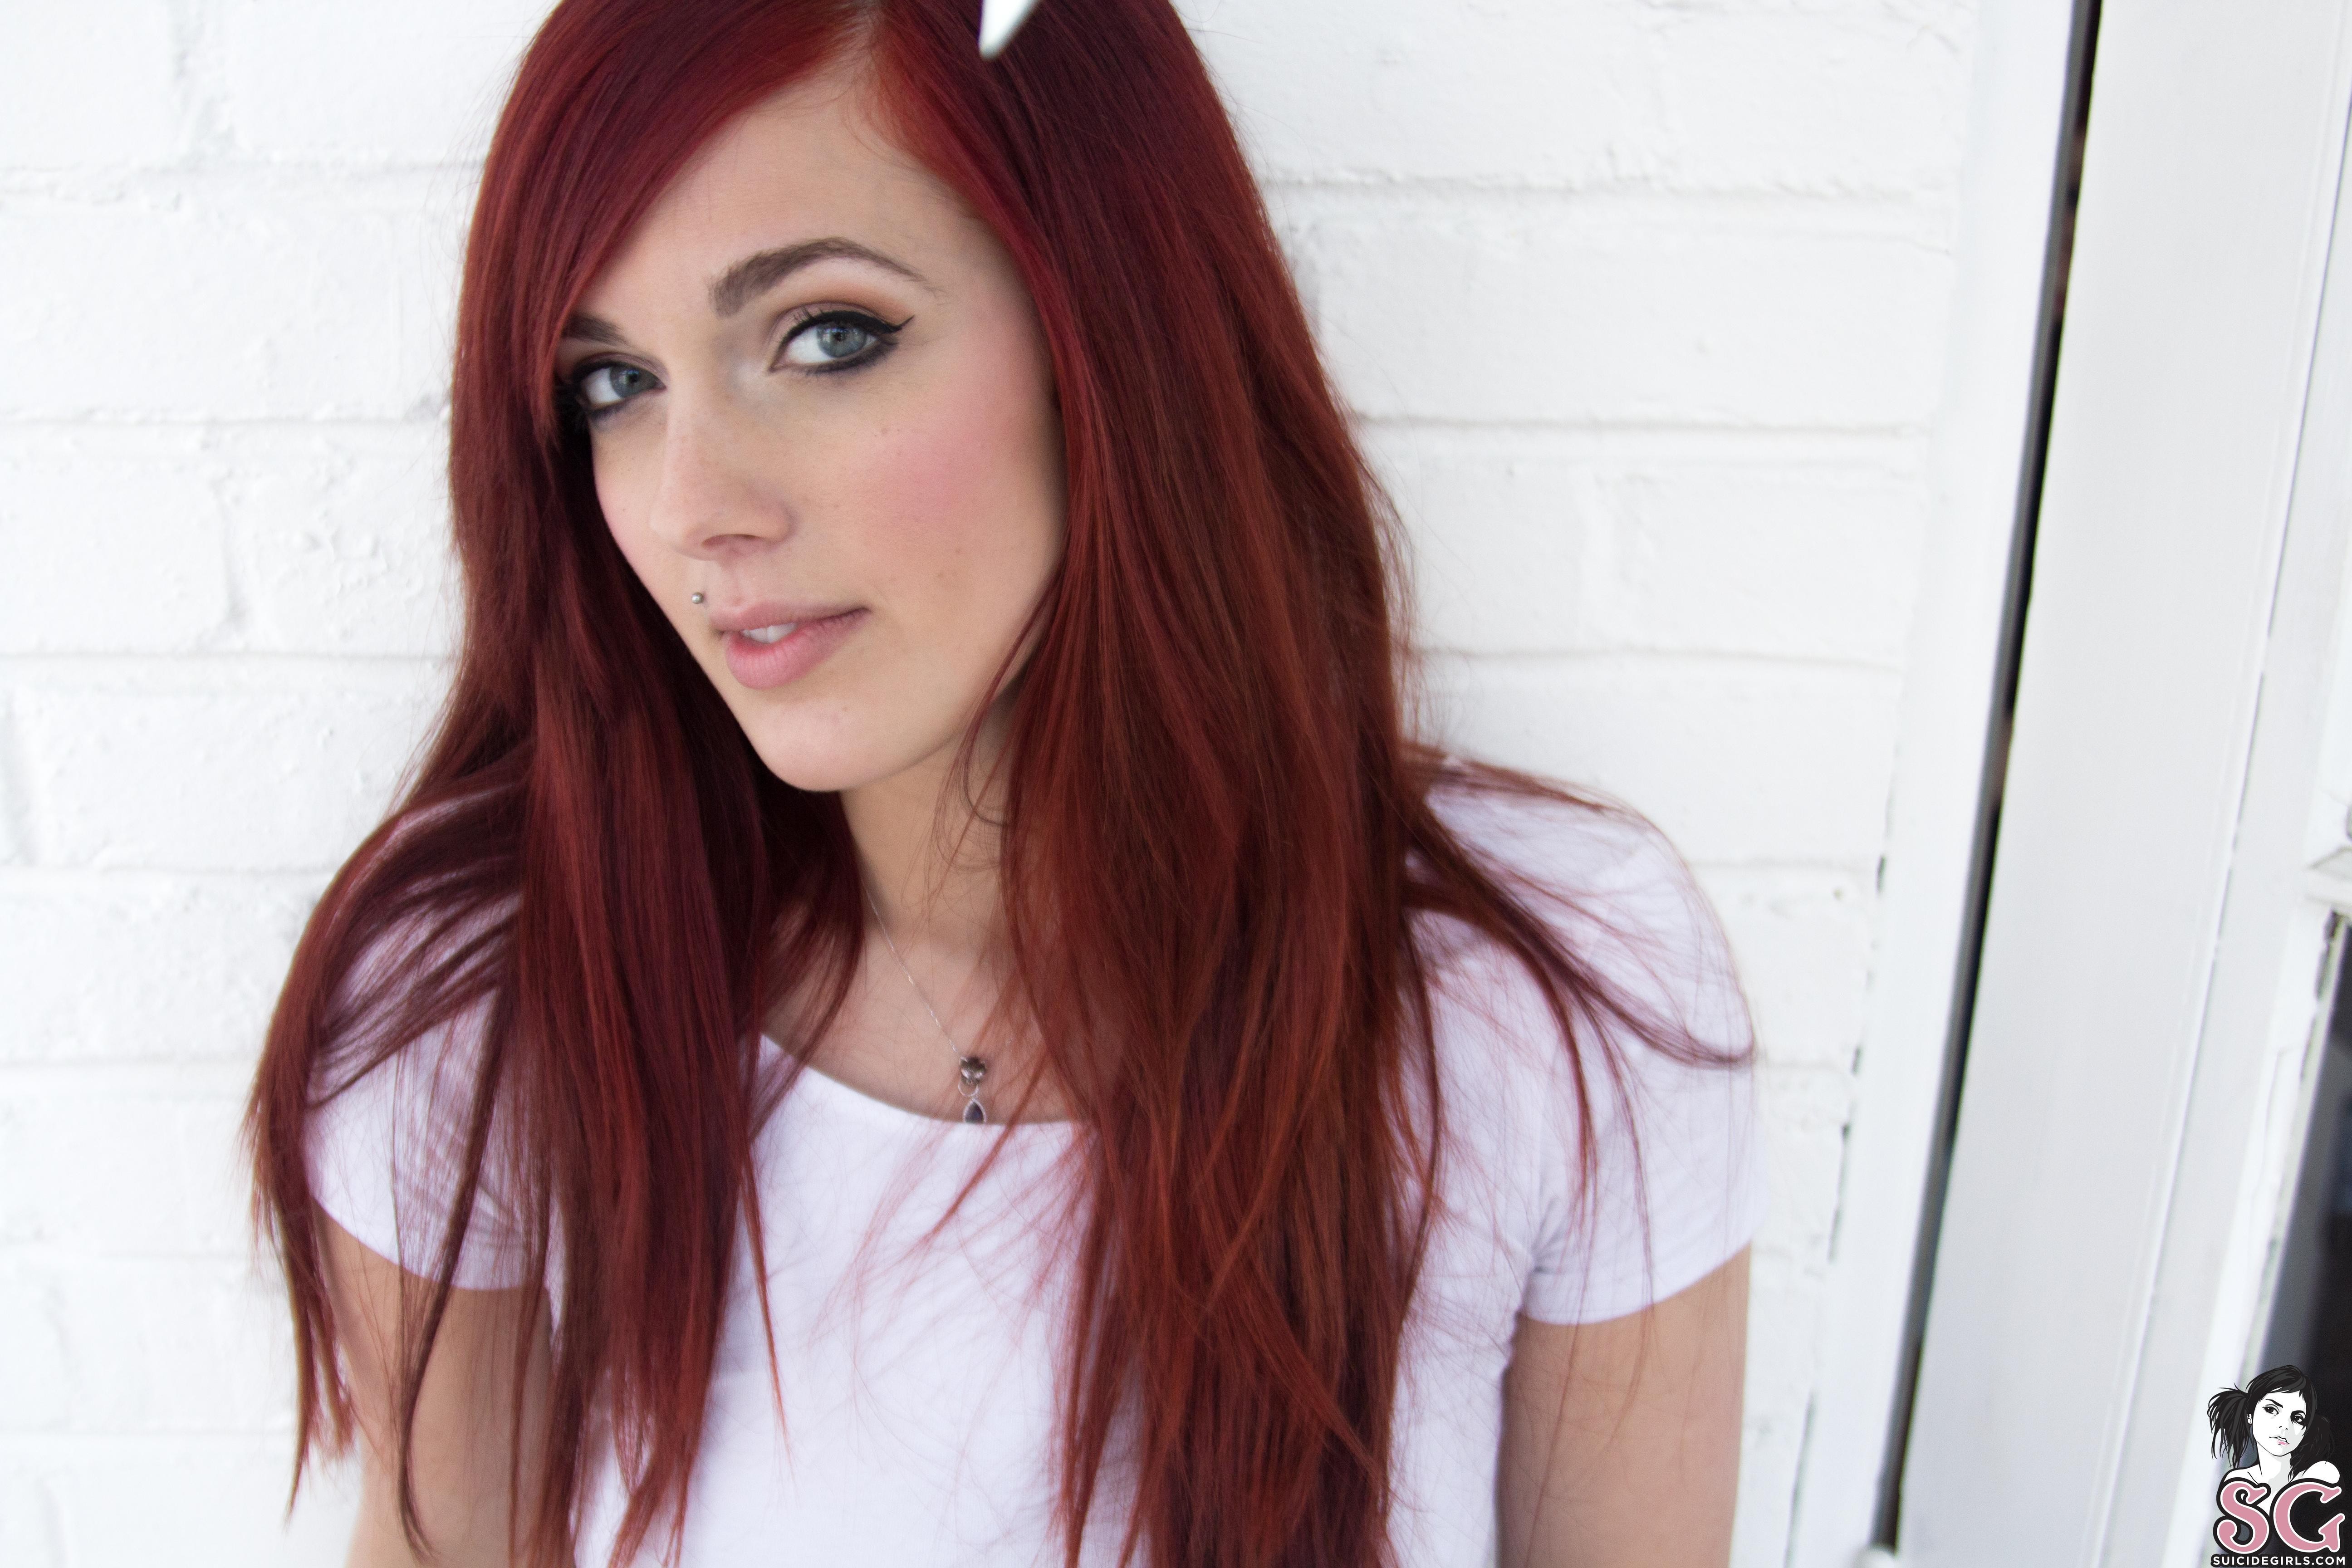 People 5184x3456 Velour Suicide women redhead Suicide Girls piercing necklace face looking at viewer long hair model